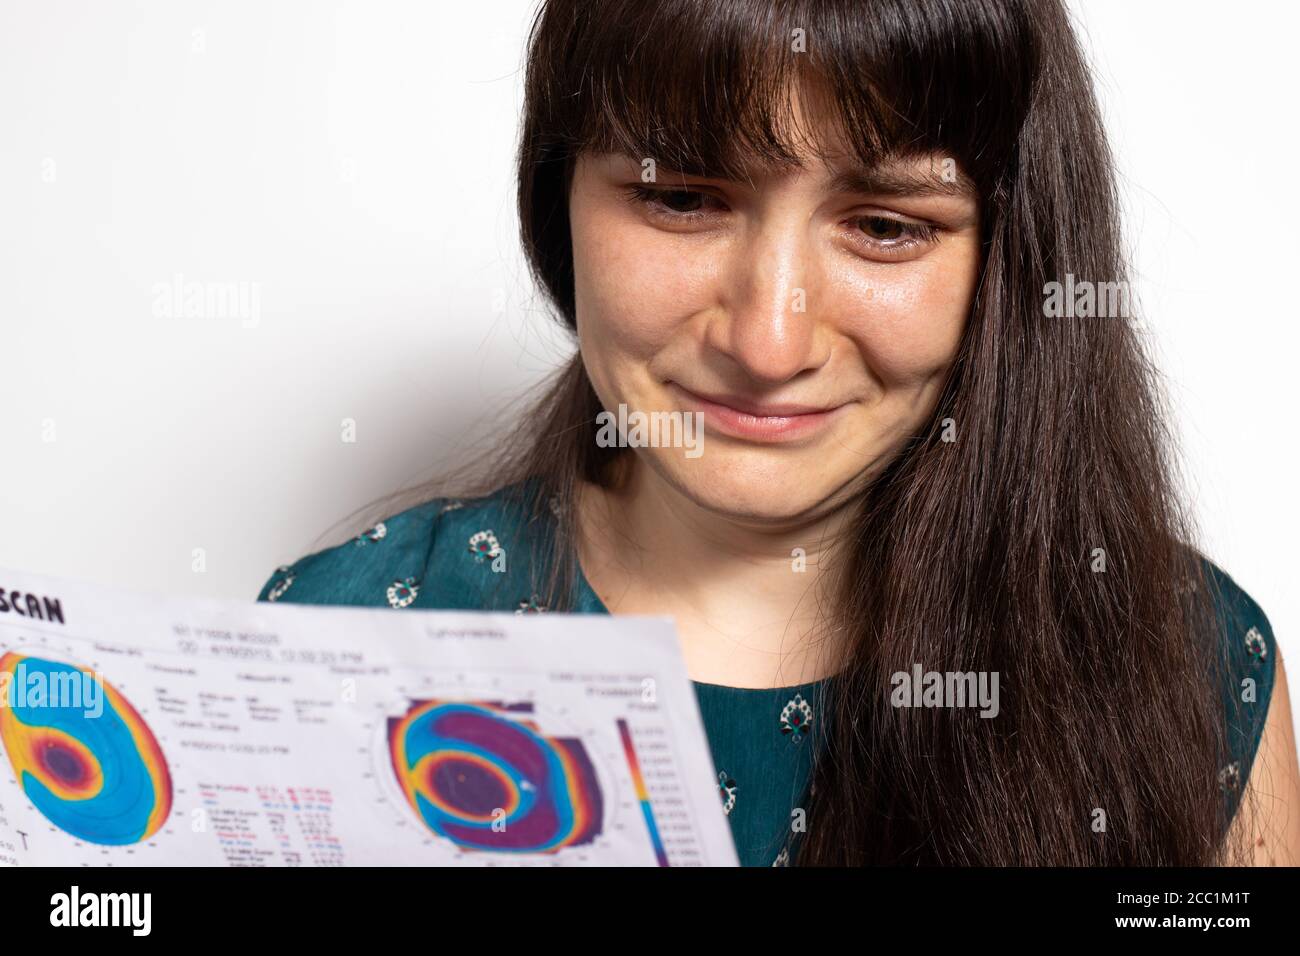 Thinning corneal dystrophy, eye keratotopography. Stock Photo